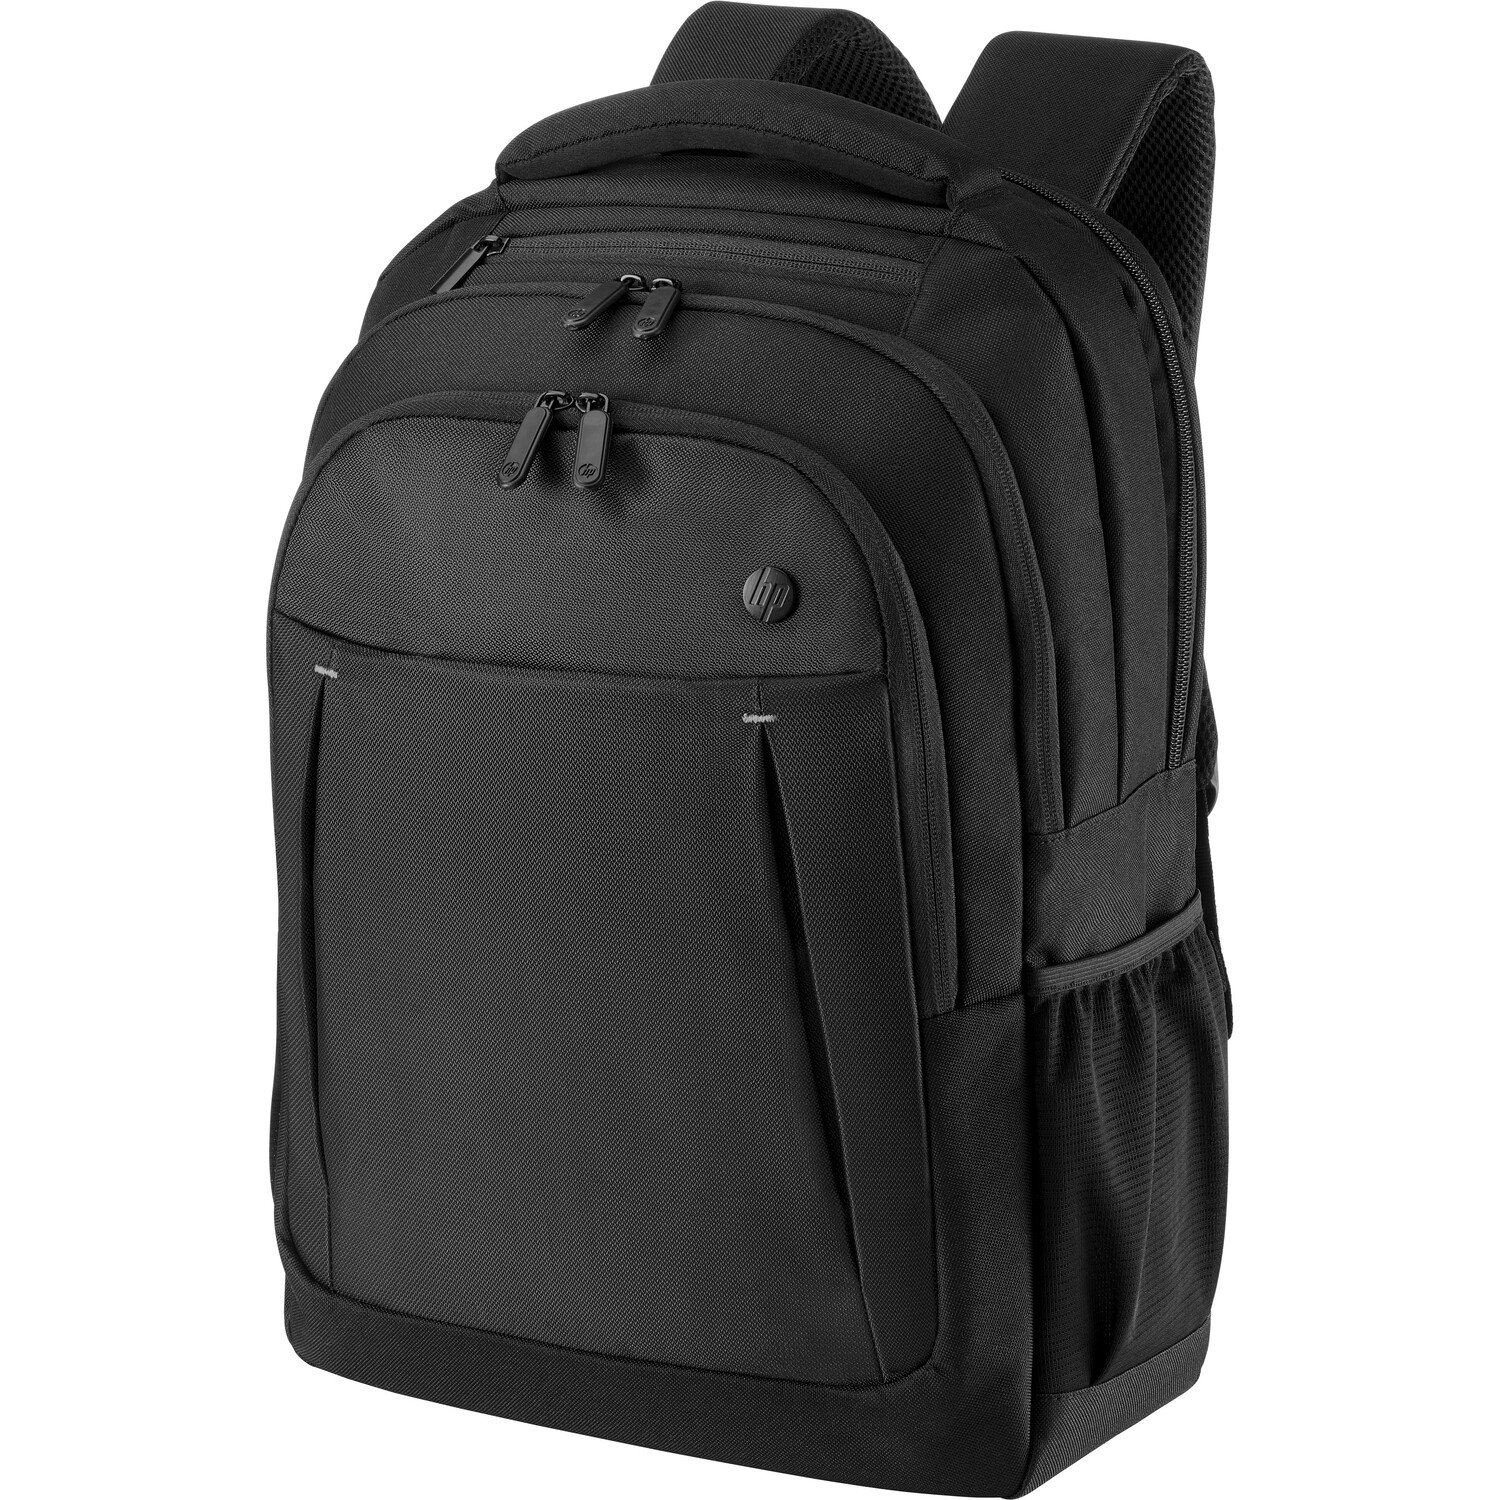 HP Carrying Case (Backpack) for 43.9 cm (17.3") Notebook, Chromebook, Credit Card, Passport, Accessories